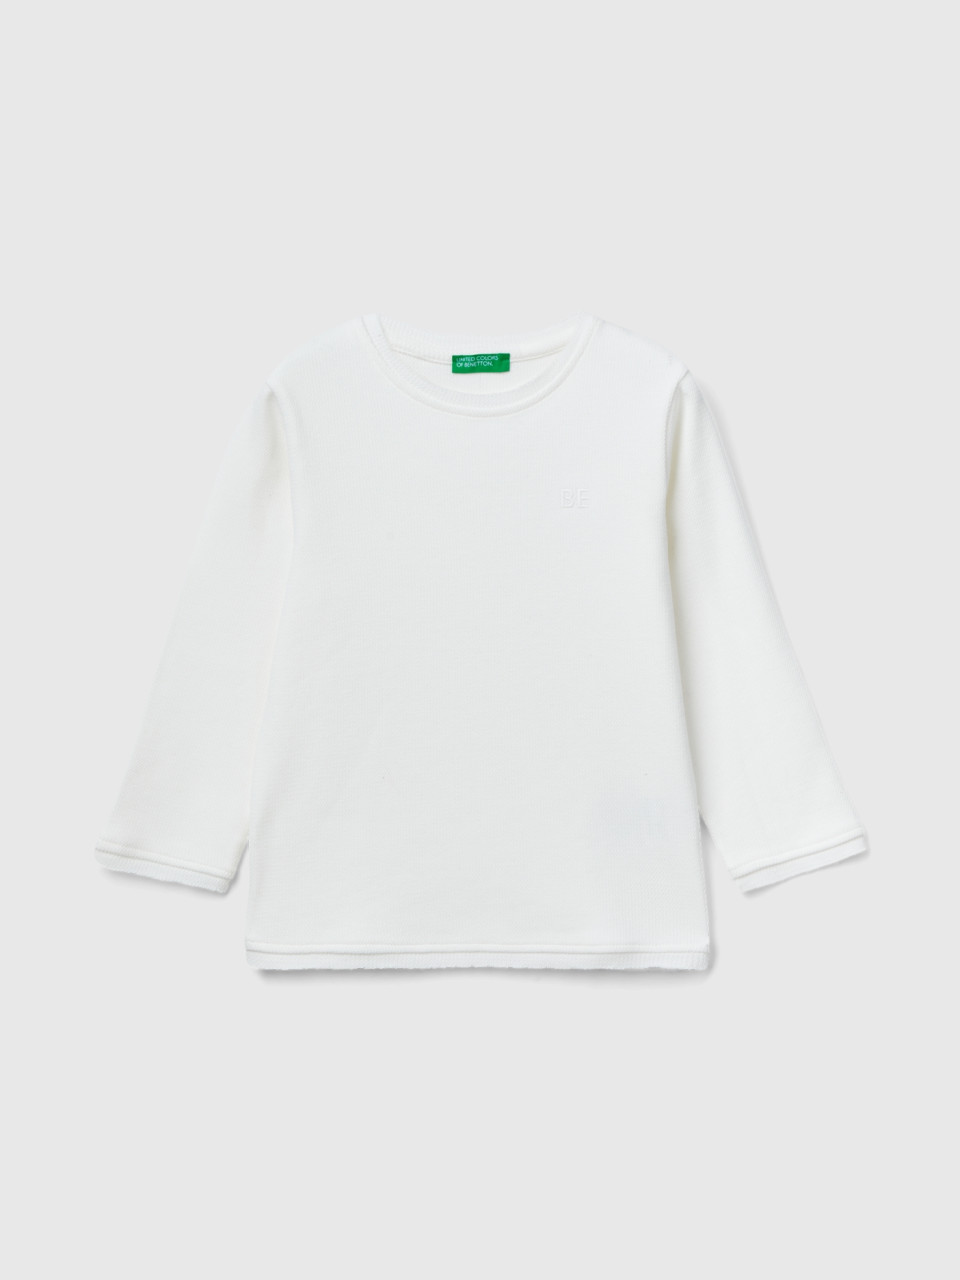 Benetton, T-shirt With be Embroidery, Creamy White, Kids